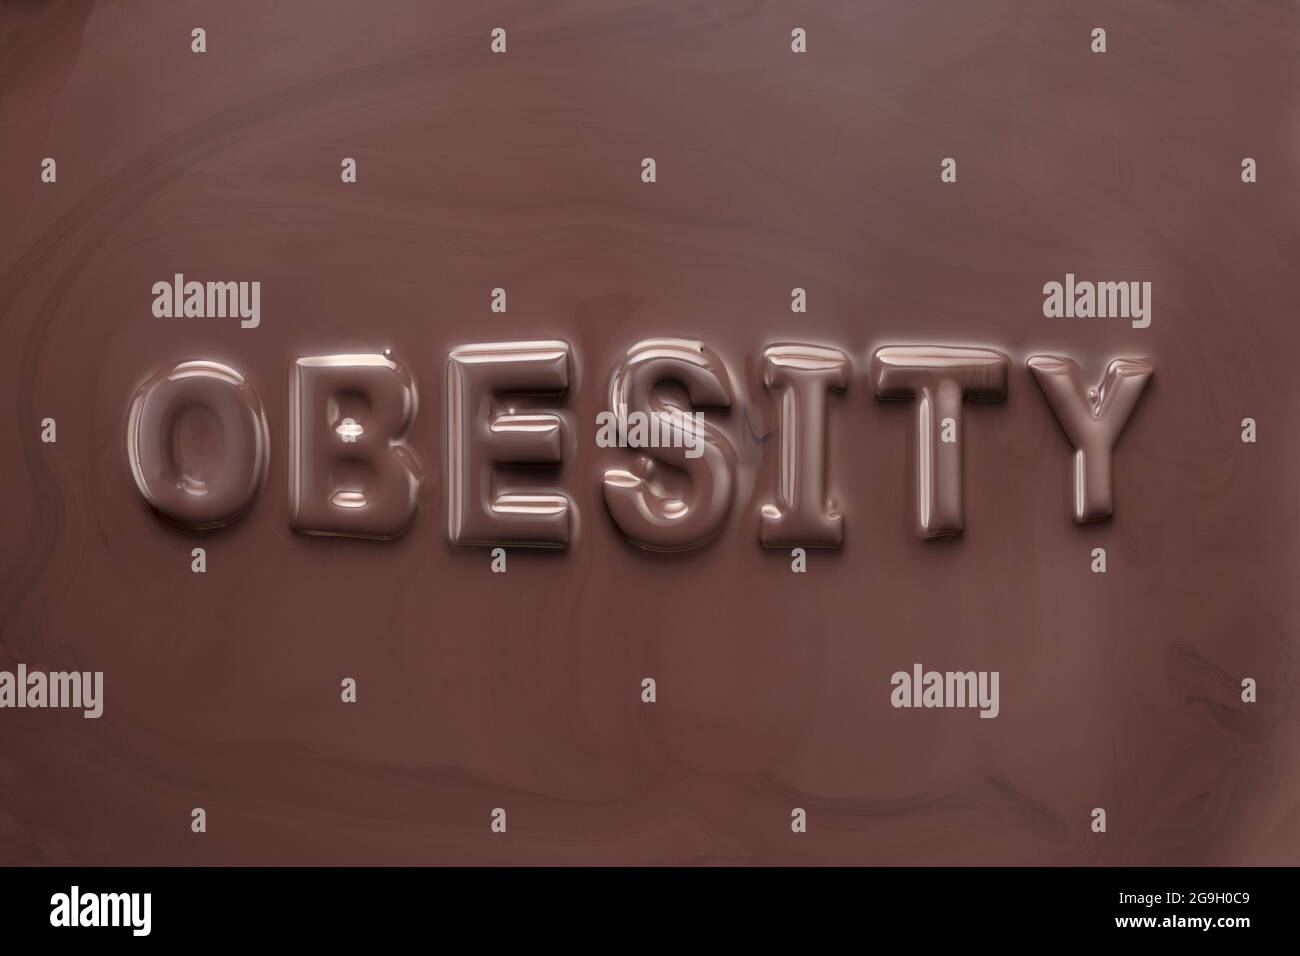 Obesity, over-weight and unhealthy eating Stock Photo